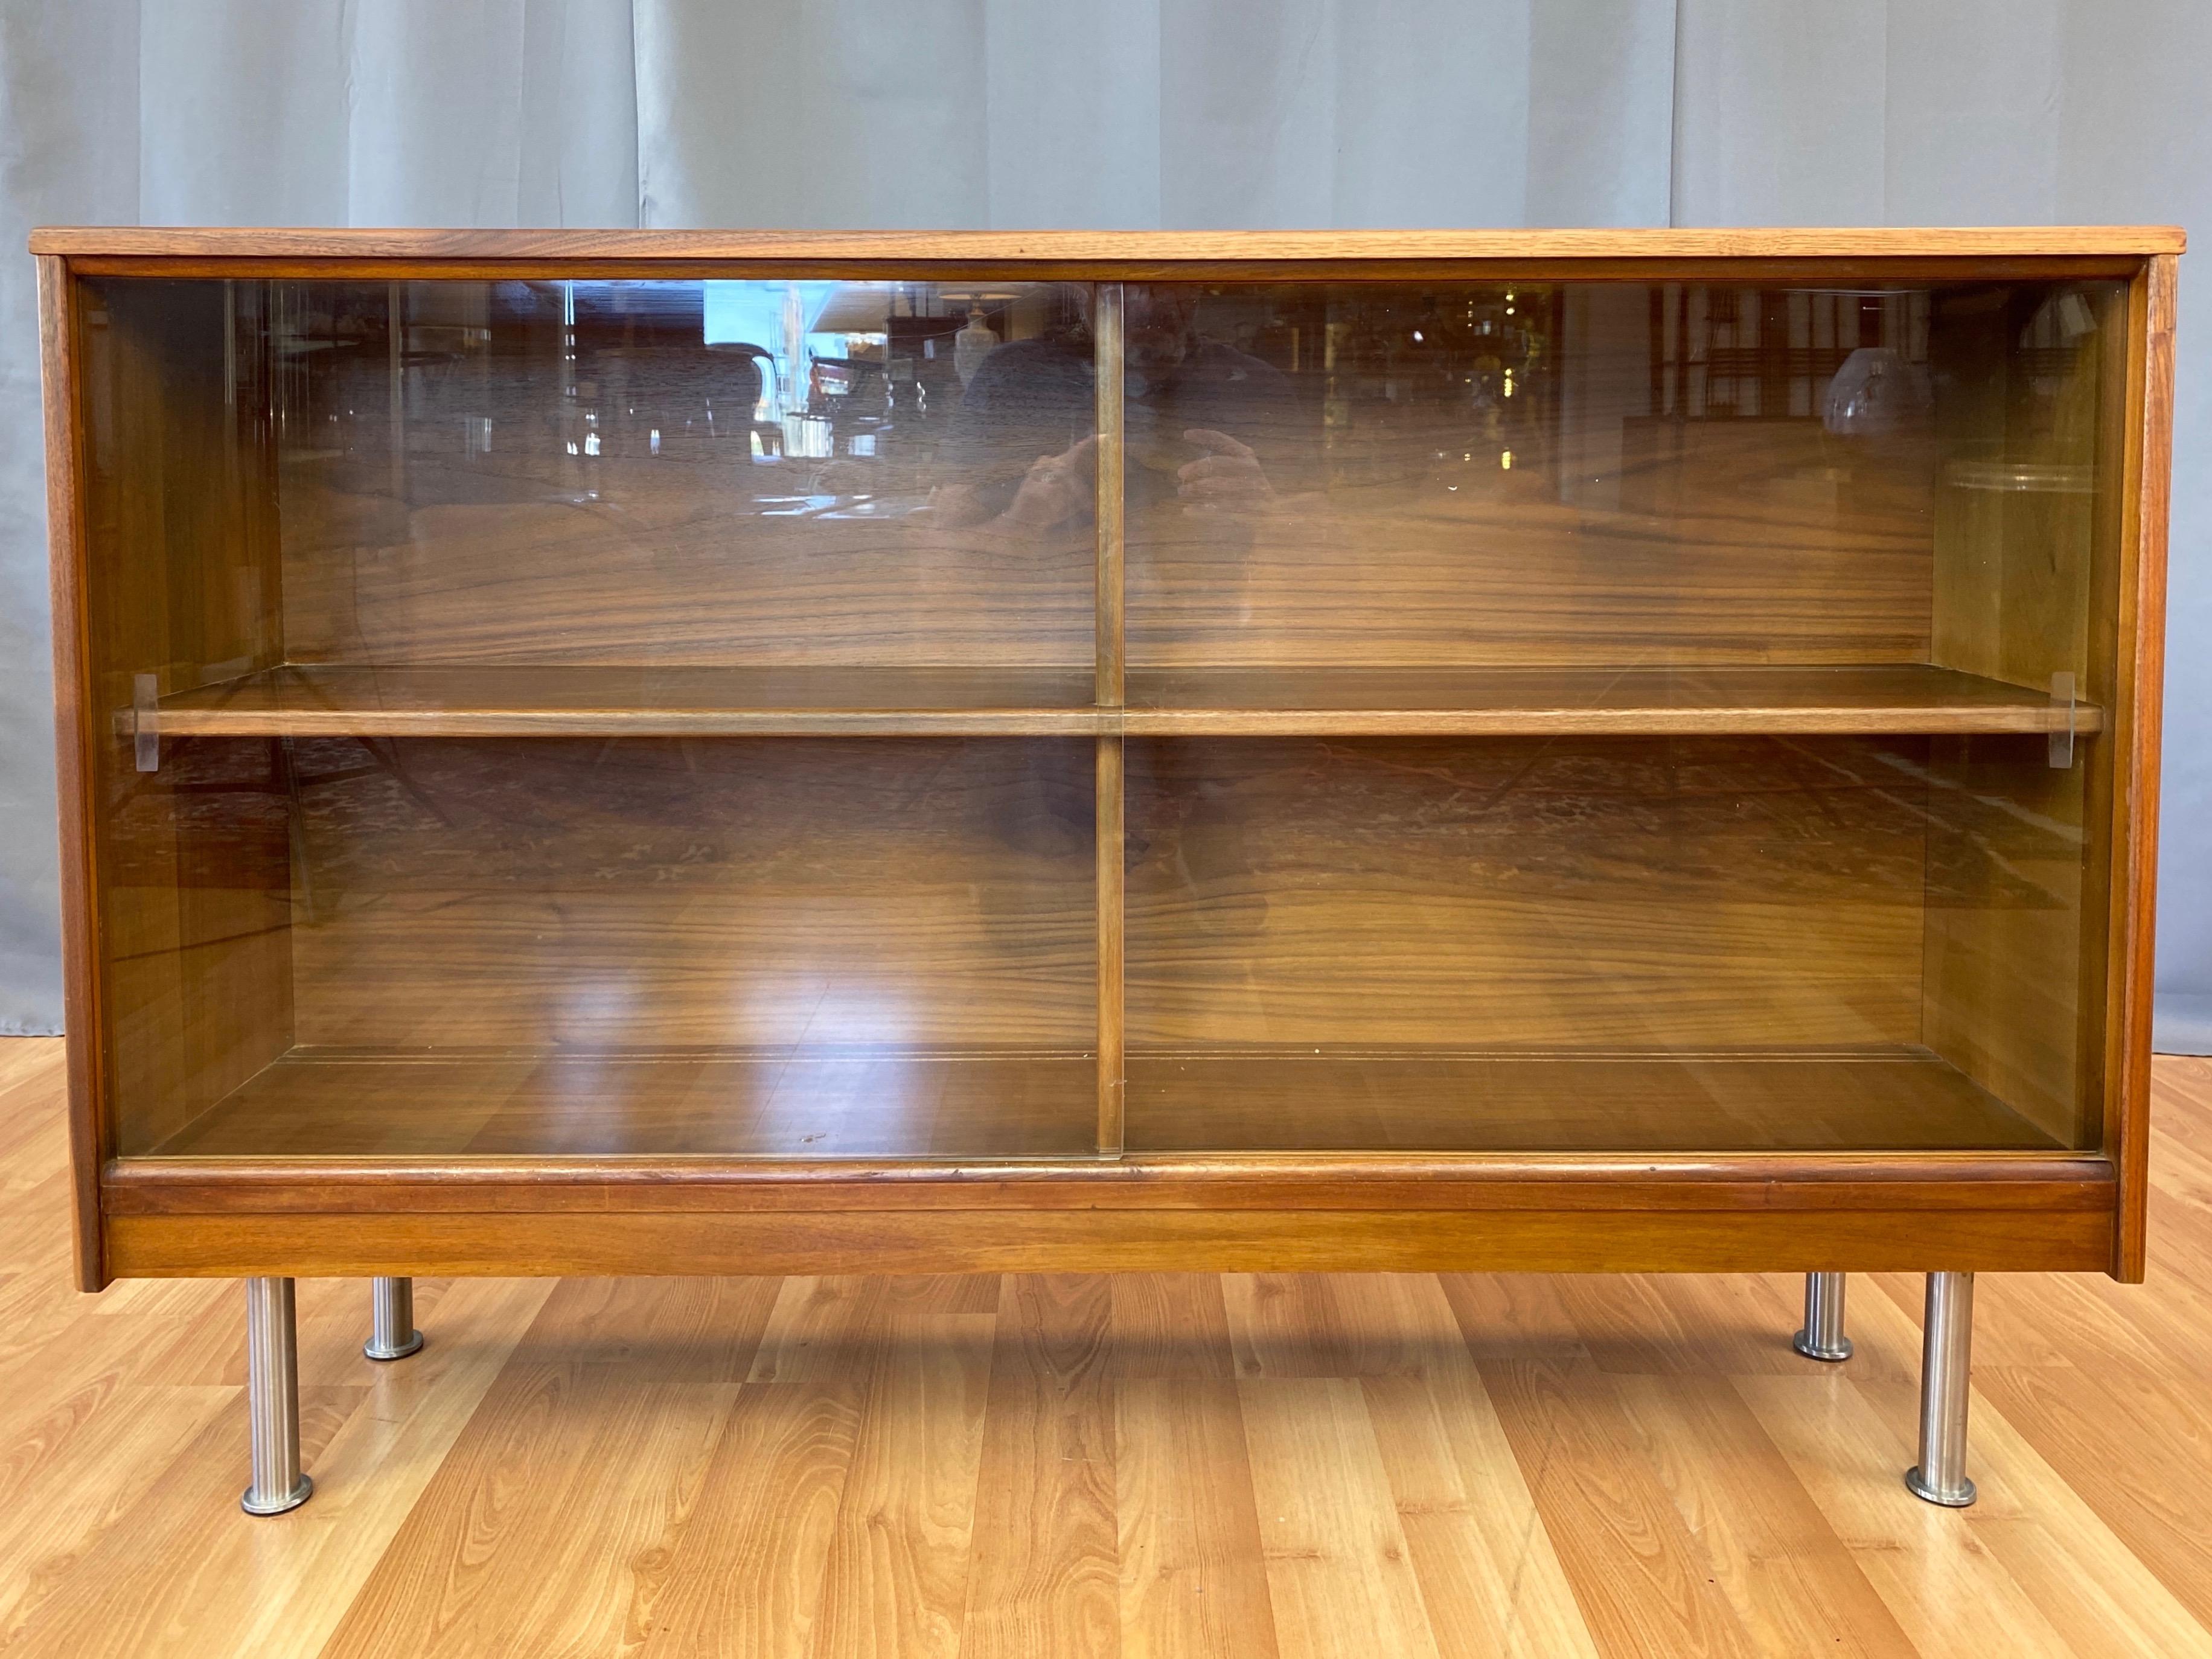 A spacious early 1960s mid-century modern walnut cabinet or bookcase with sliding glass door front.

Clean lines and handsome aesthetic would look equally great in a Danish modern or contemporary interior. Very well crafted, with nicely figured